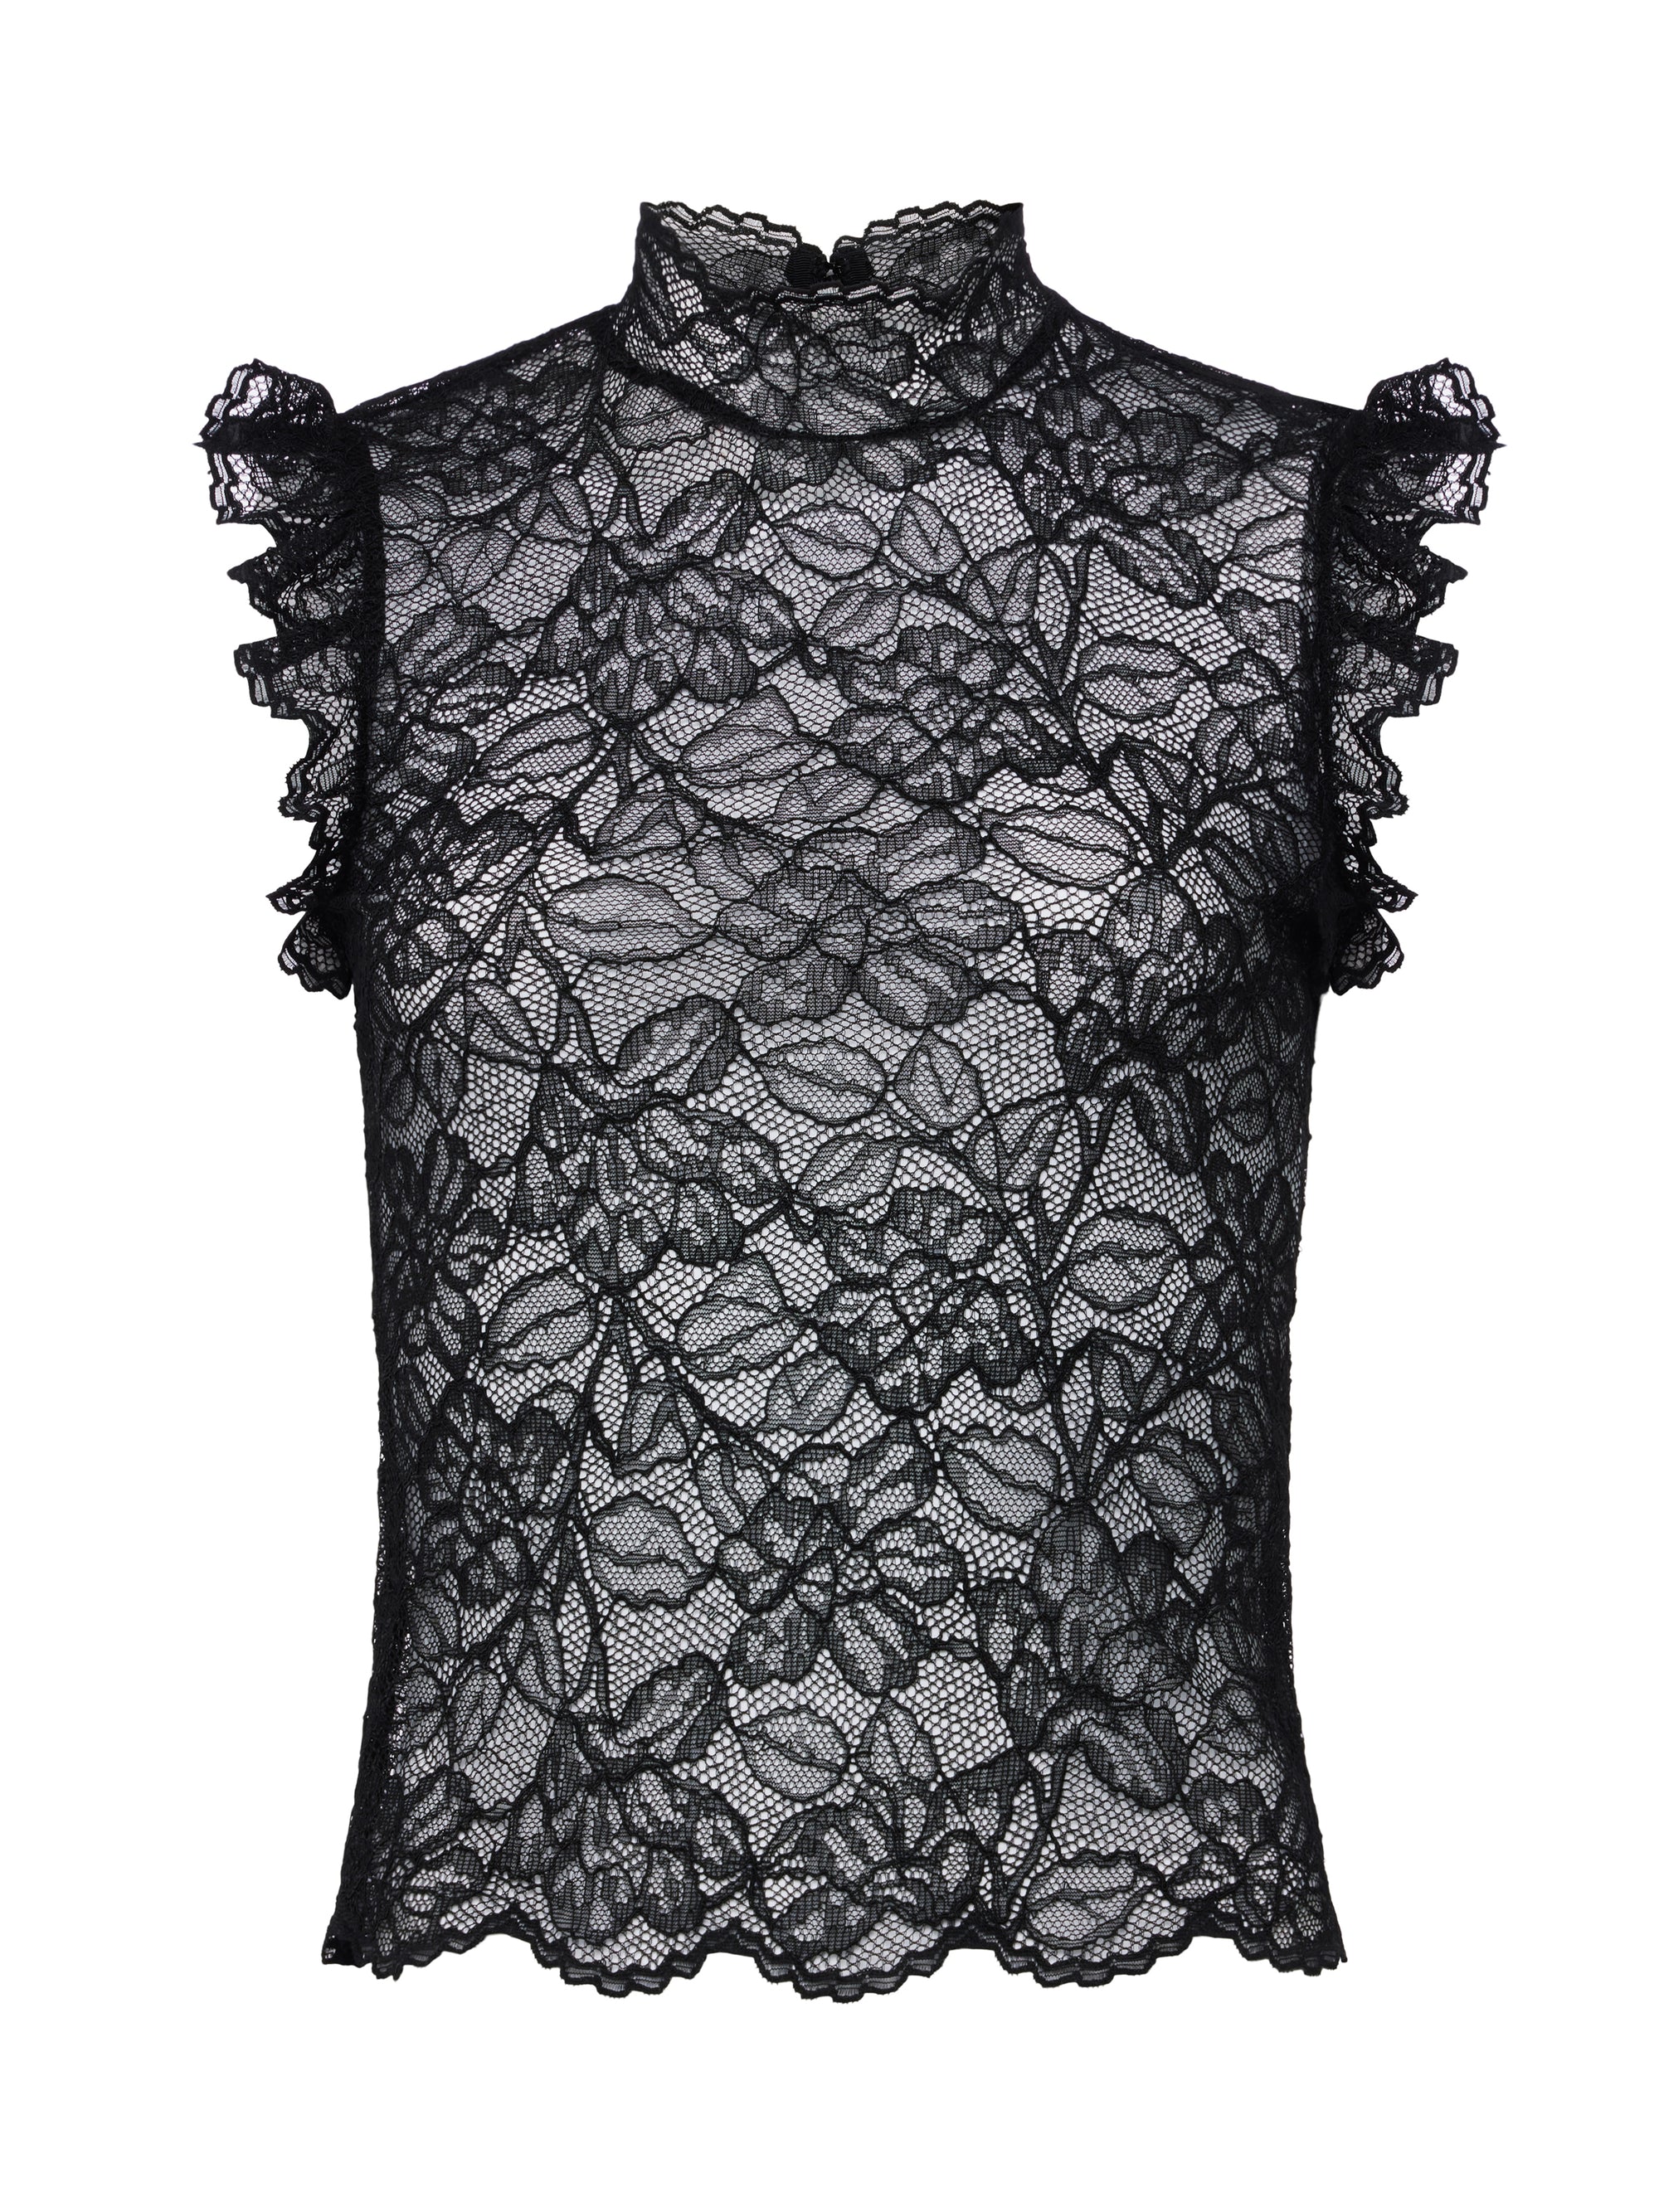 Kaila Sleeveless Lace Top by L'agence